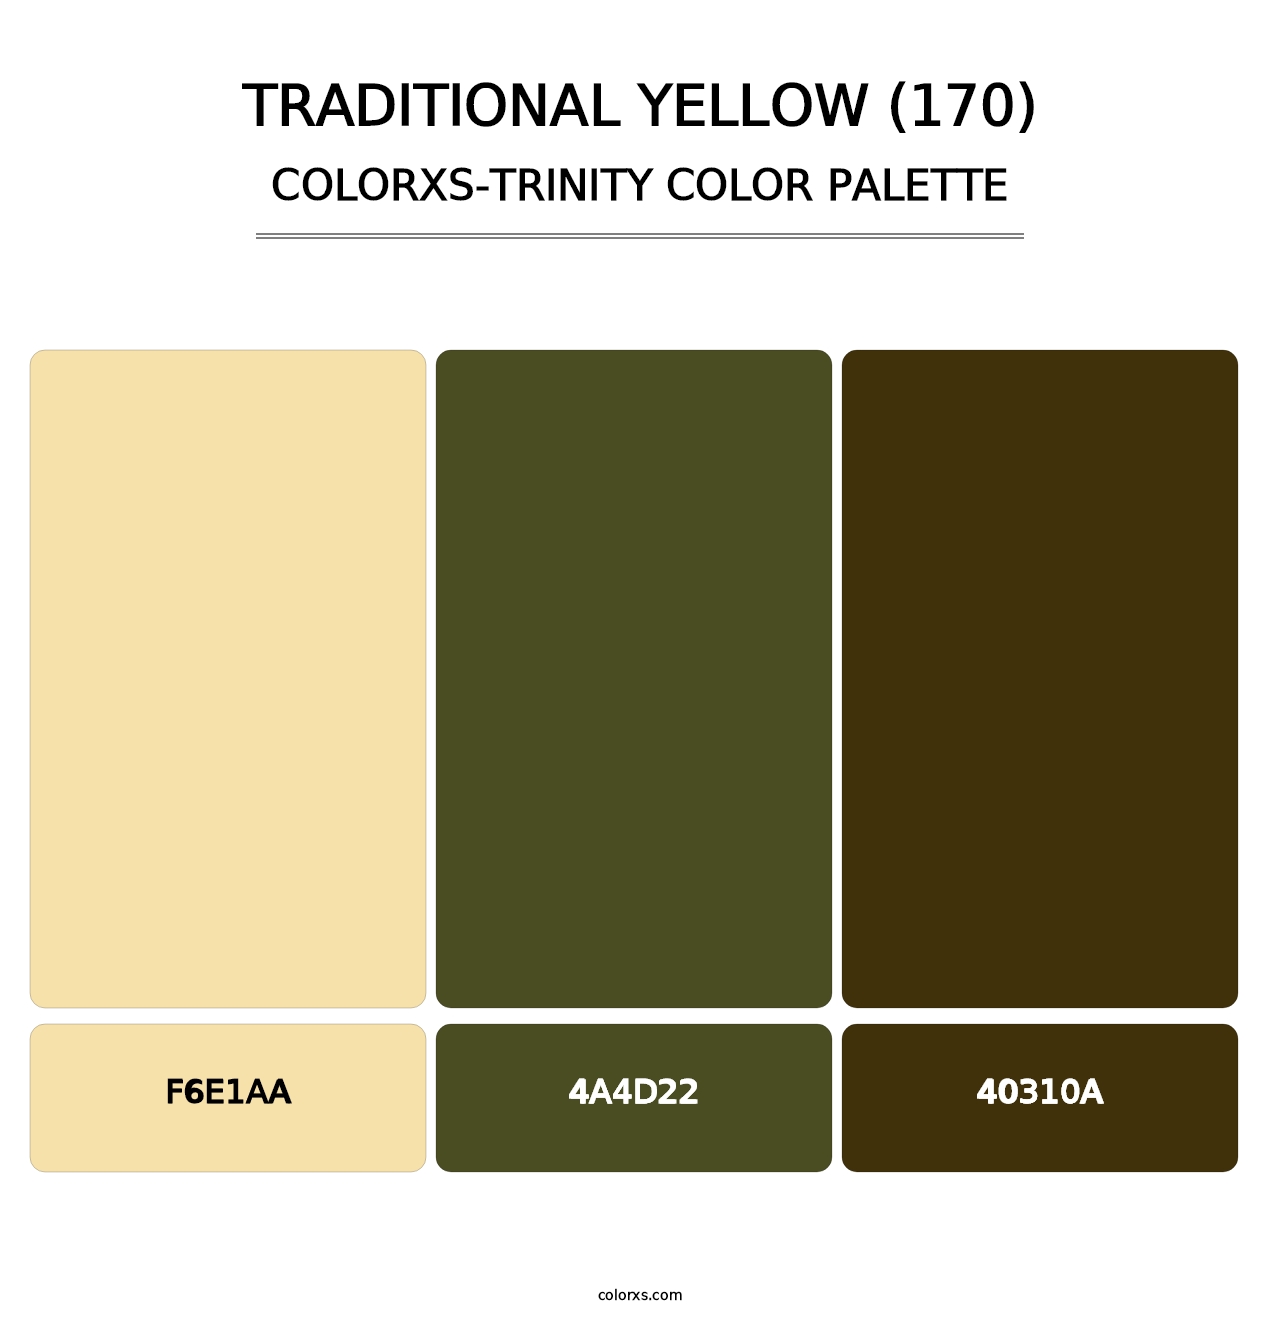 Traditional Yellow (170) - Colorxs Trinity Palette